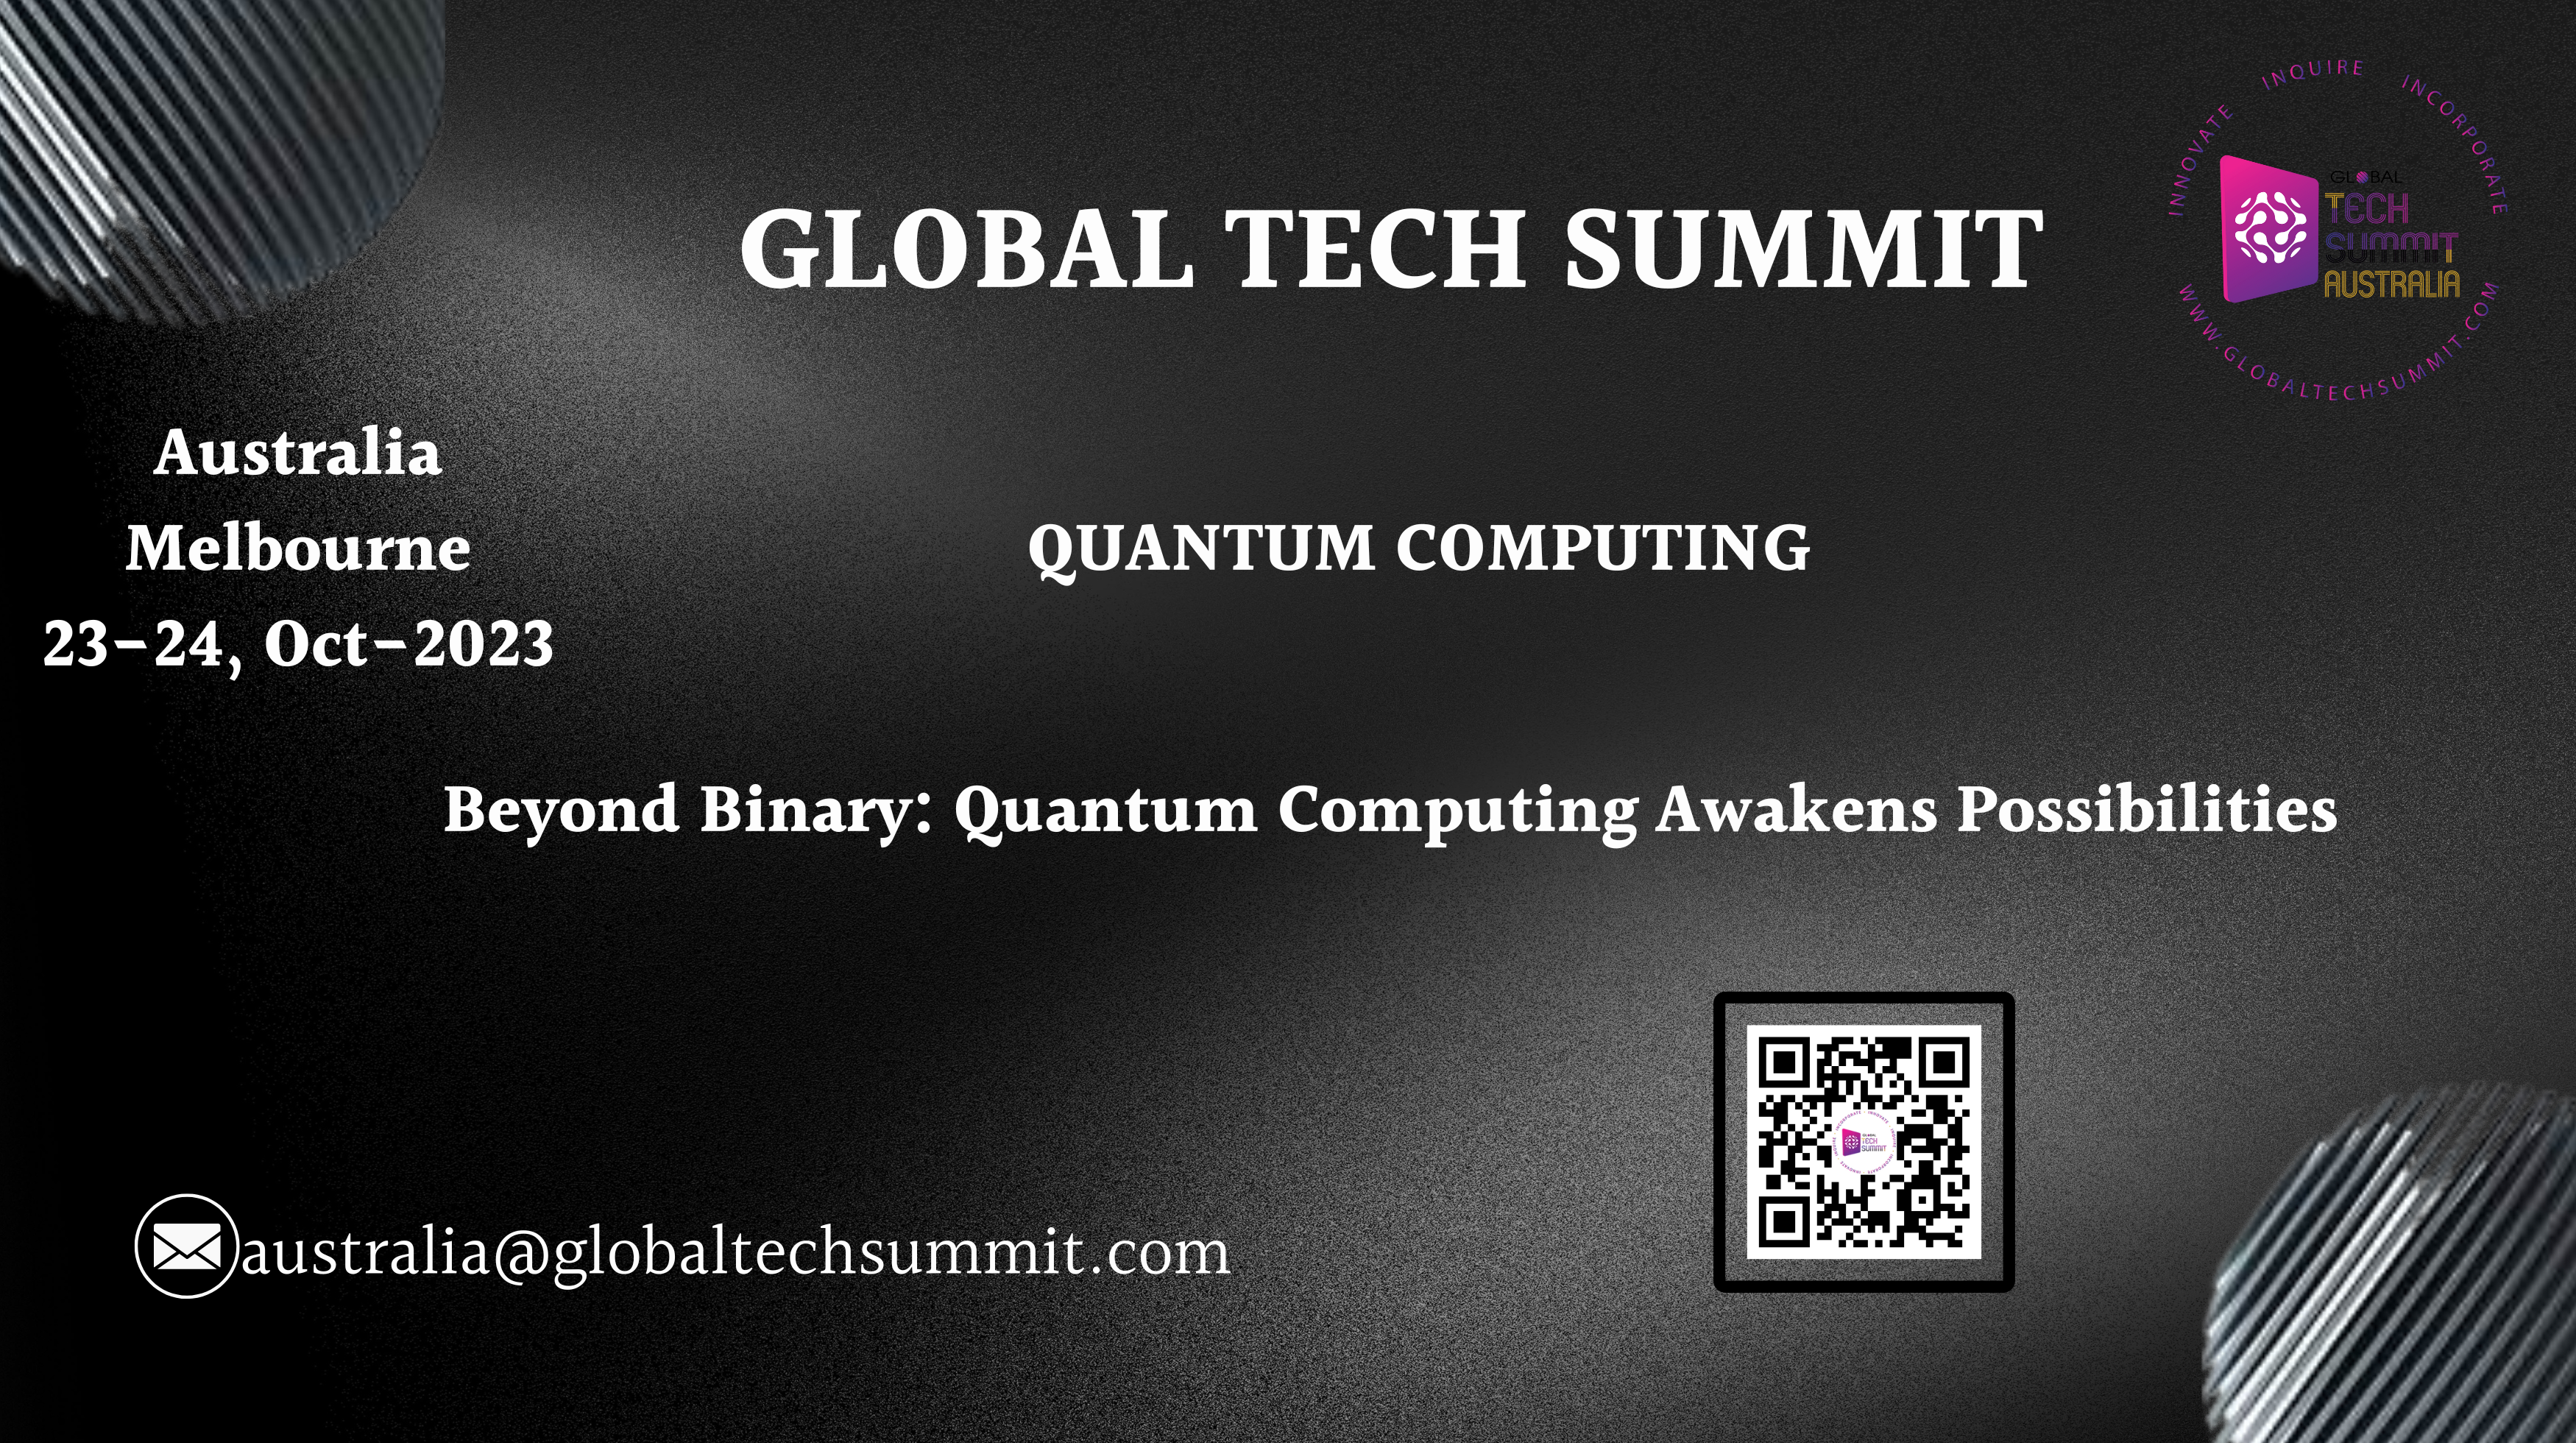 Pioneering the Future of Technology with Quantum Computing